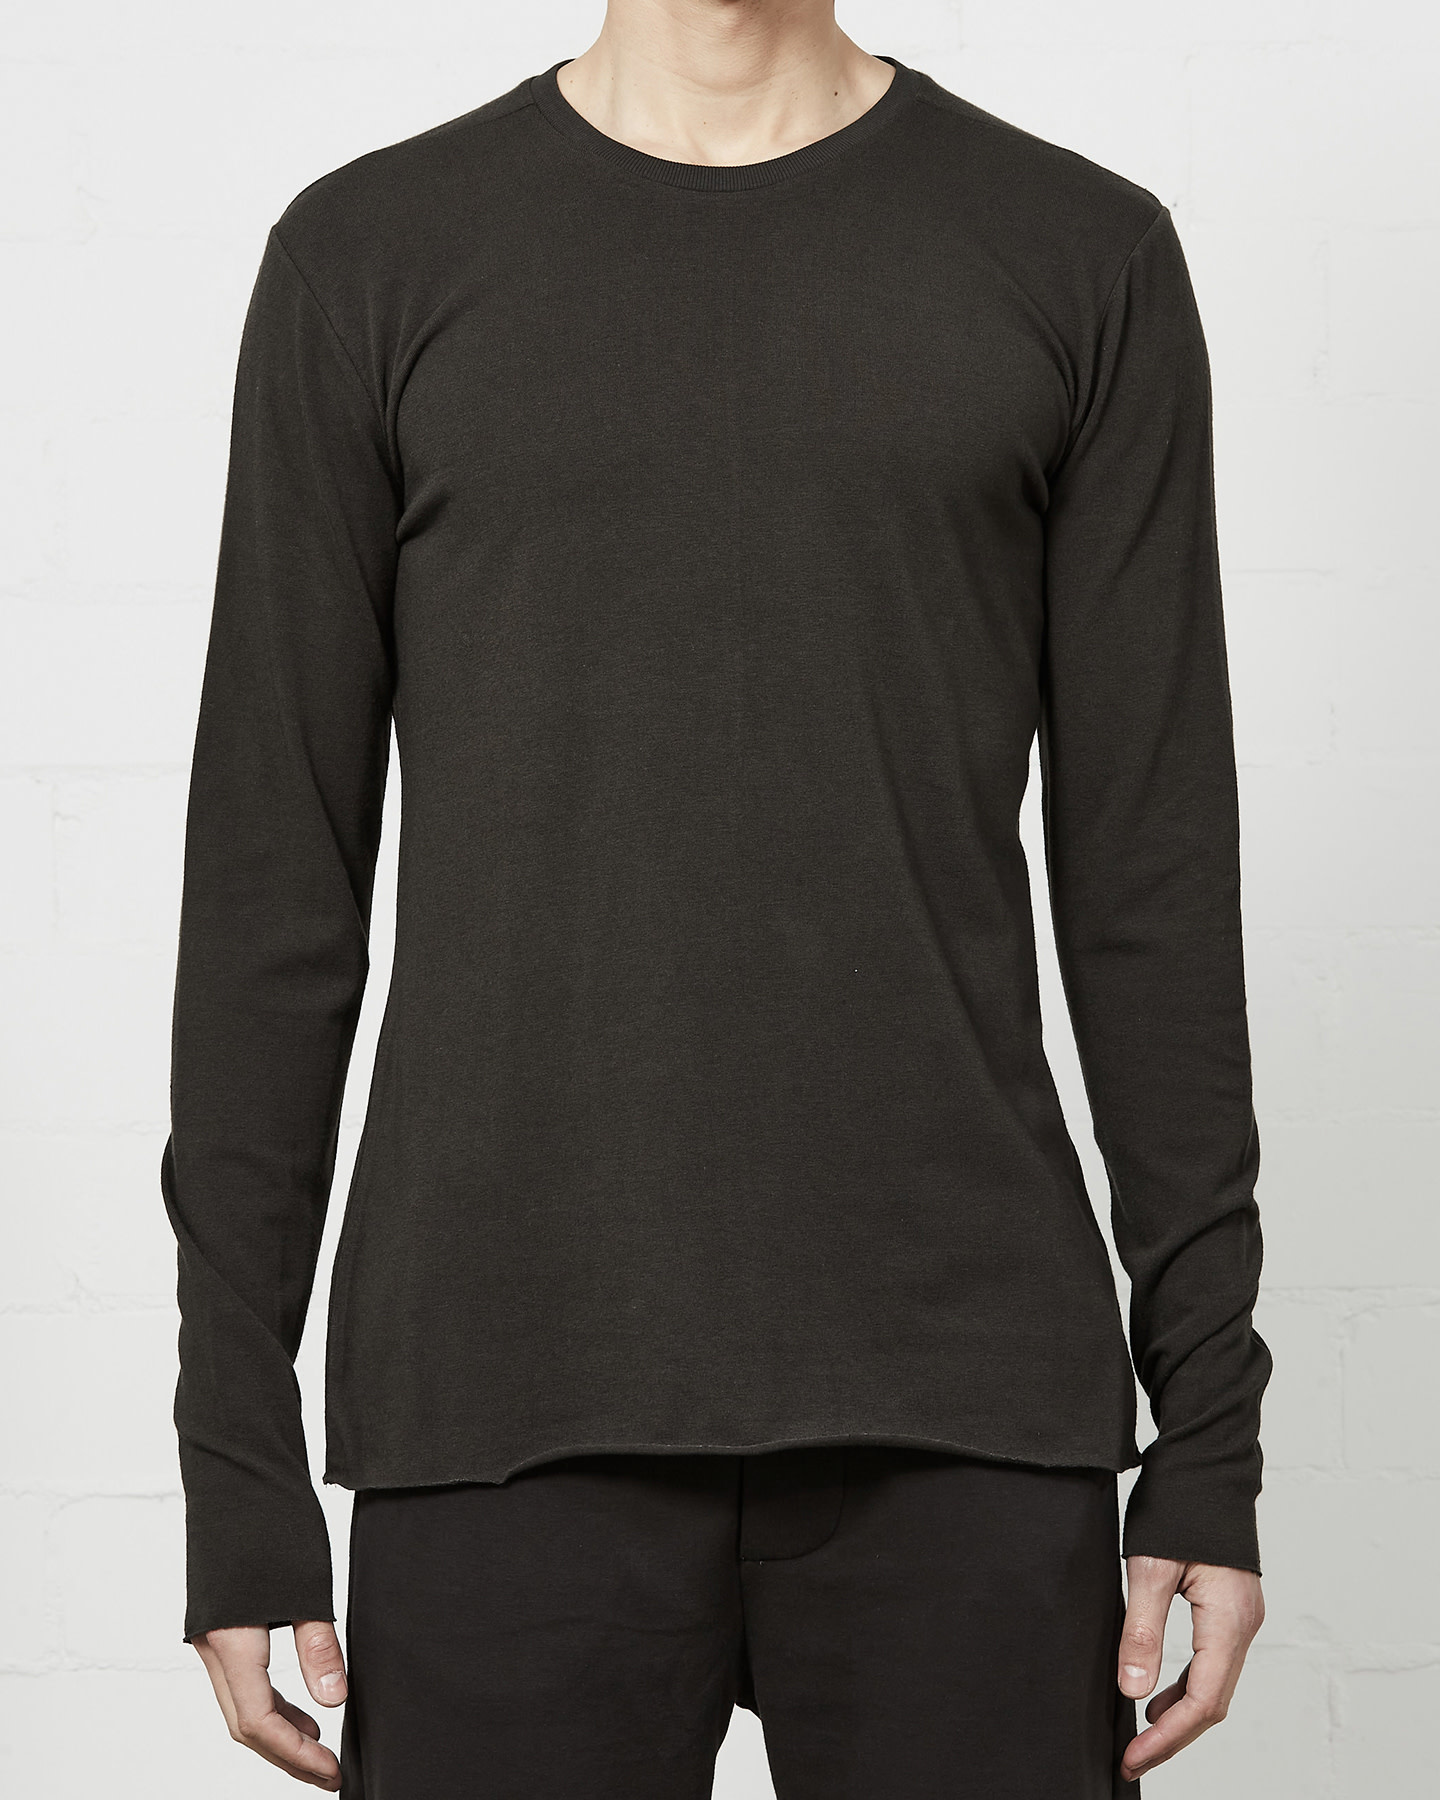 STRETCH COTTON MODAL FITTED LONG SLEEVE - BROWN